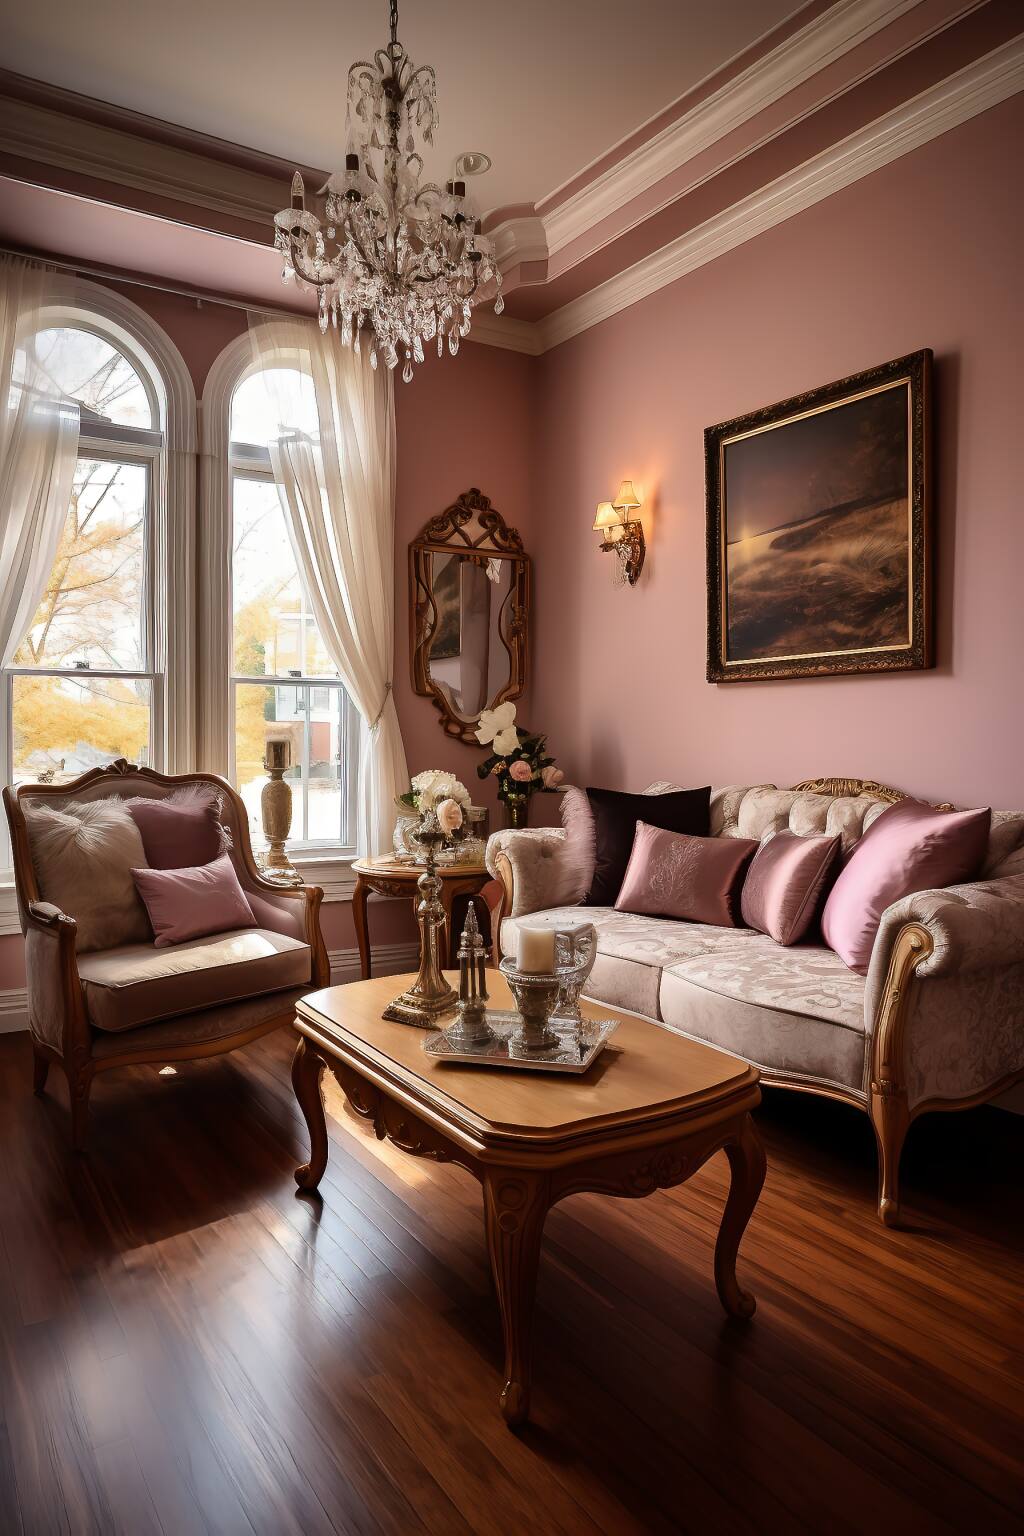 A Moody Romantic Living Room With Victorian-Style Furniture, Plush Pink Accents, And A Grand Chandelier In A Transitional Setting.